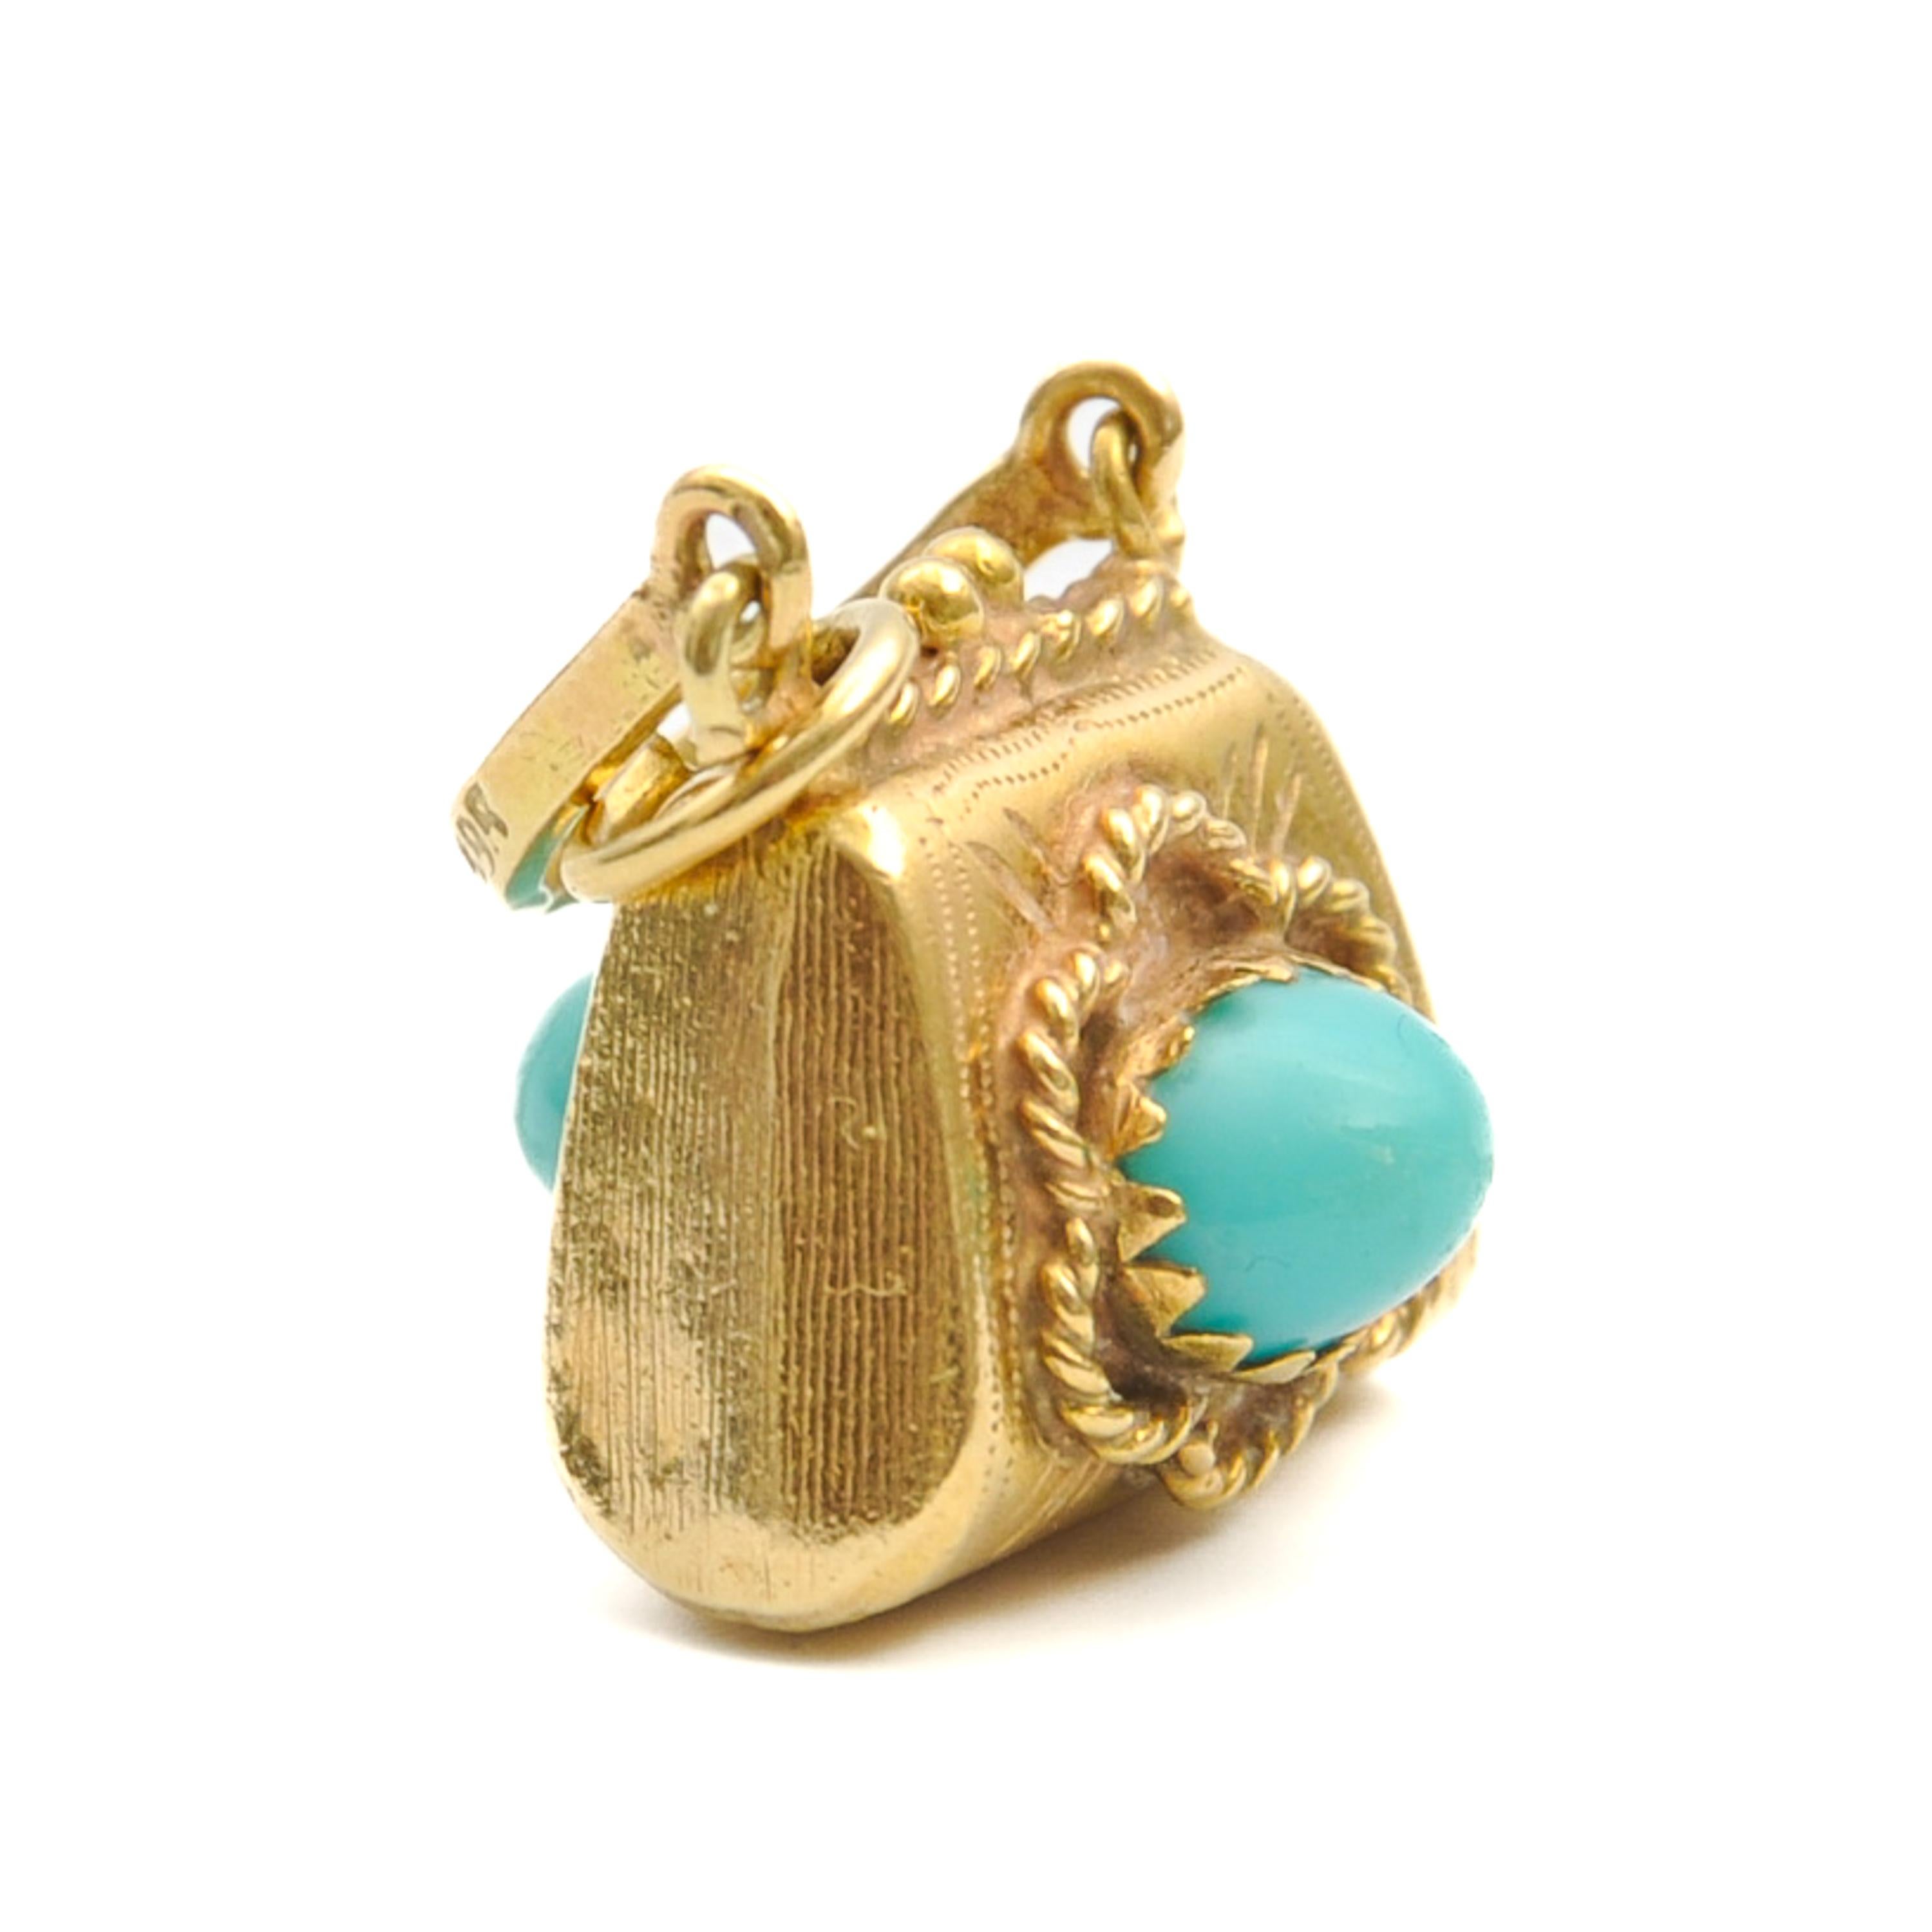 Women's Vintage 14K Gold and Turquoise Purse Charm Pendant For Sale